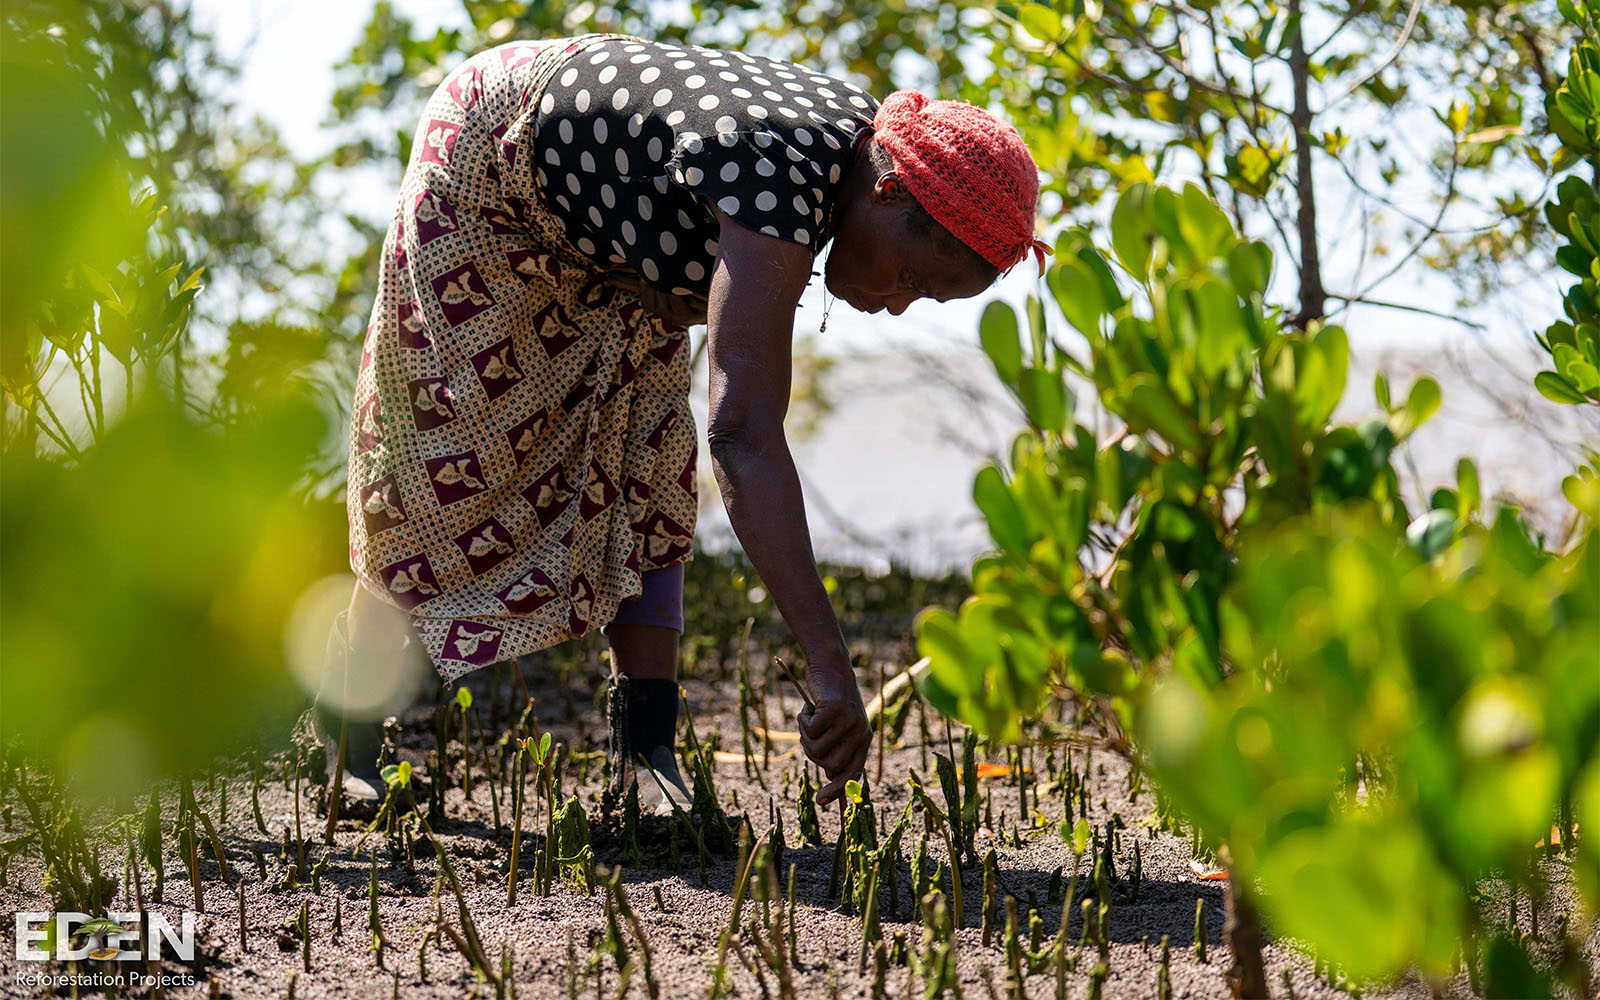 Woman planting mangrove trees in a tree field